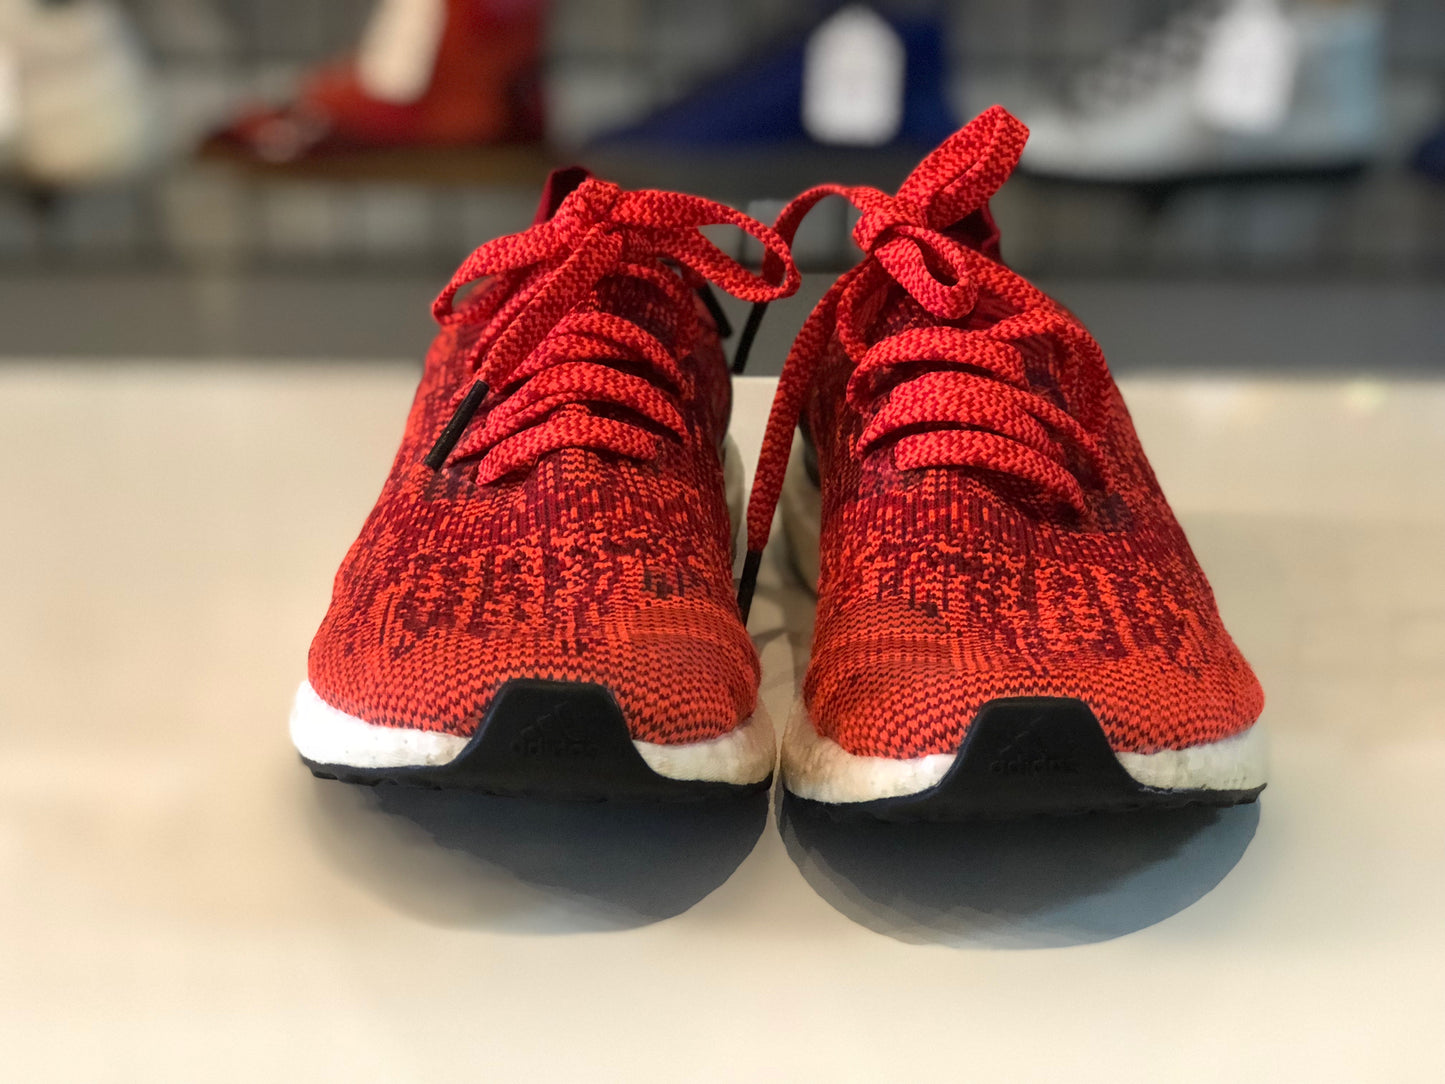 Adidas Ultra Boost Uncaged "Solar Red"